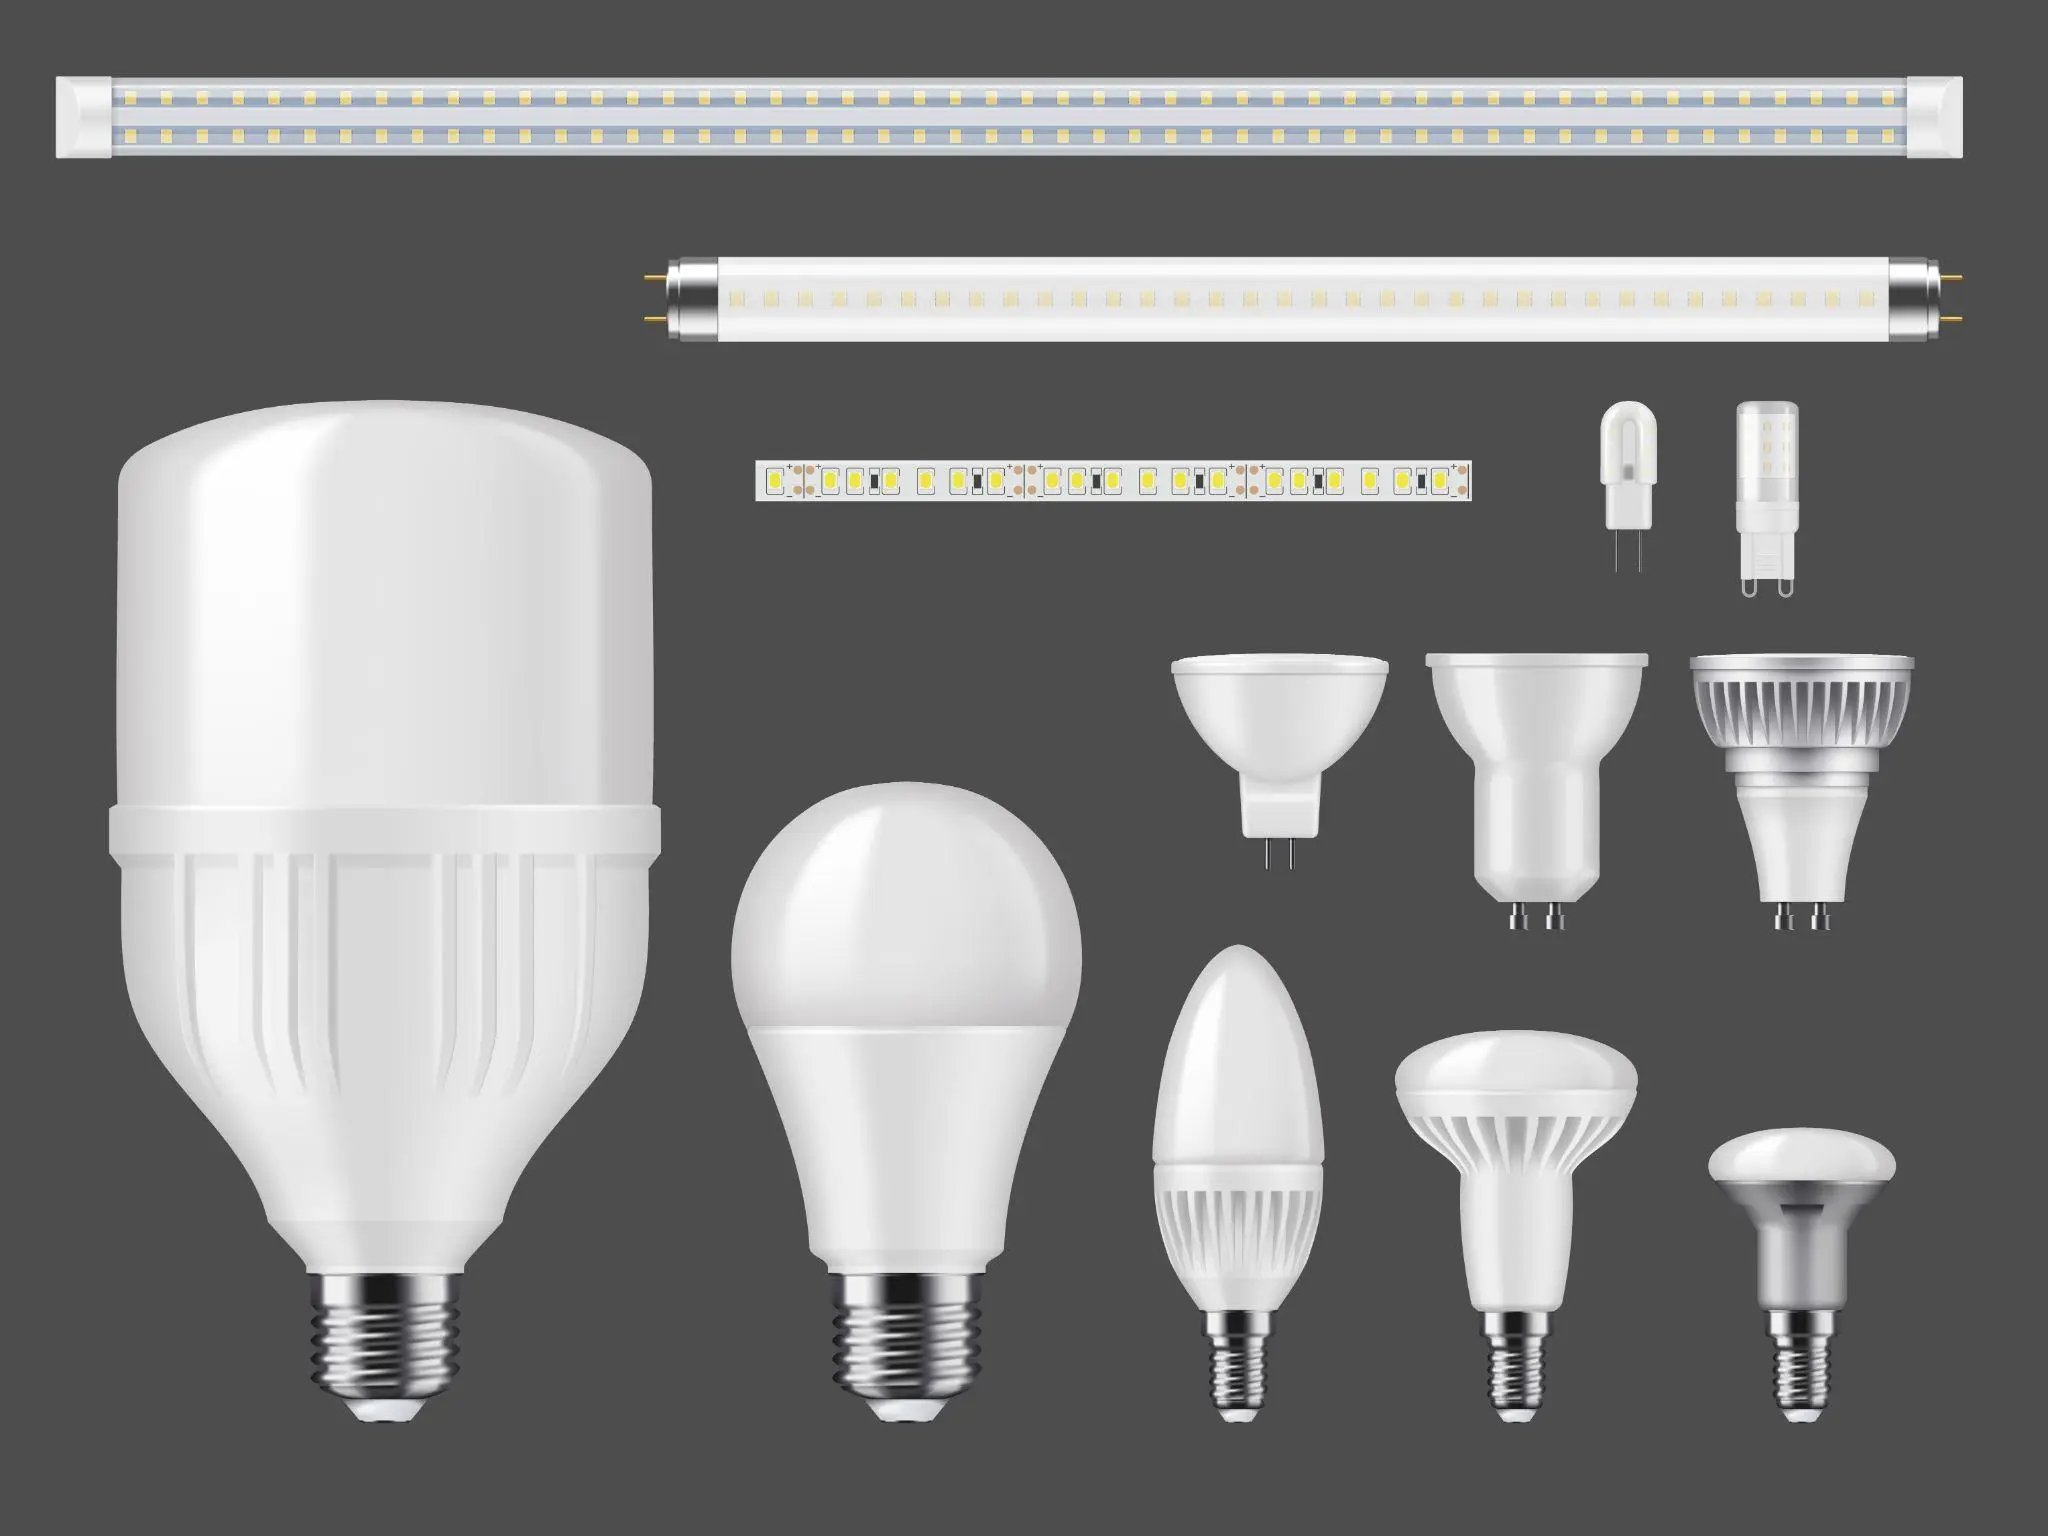 Led lamps and light strips mockup